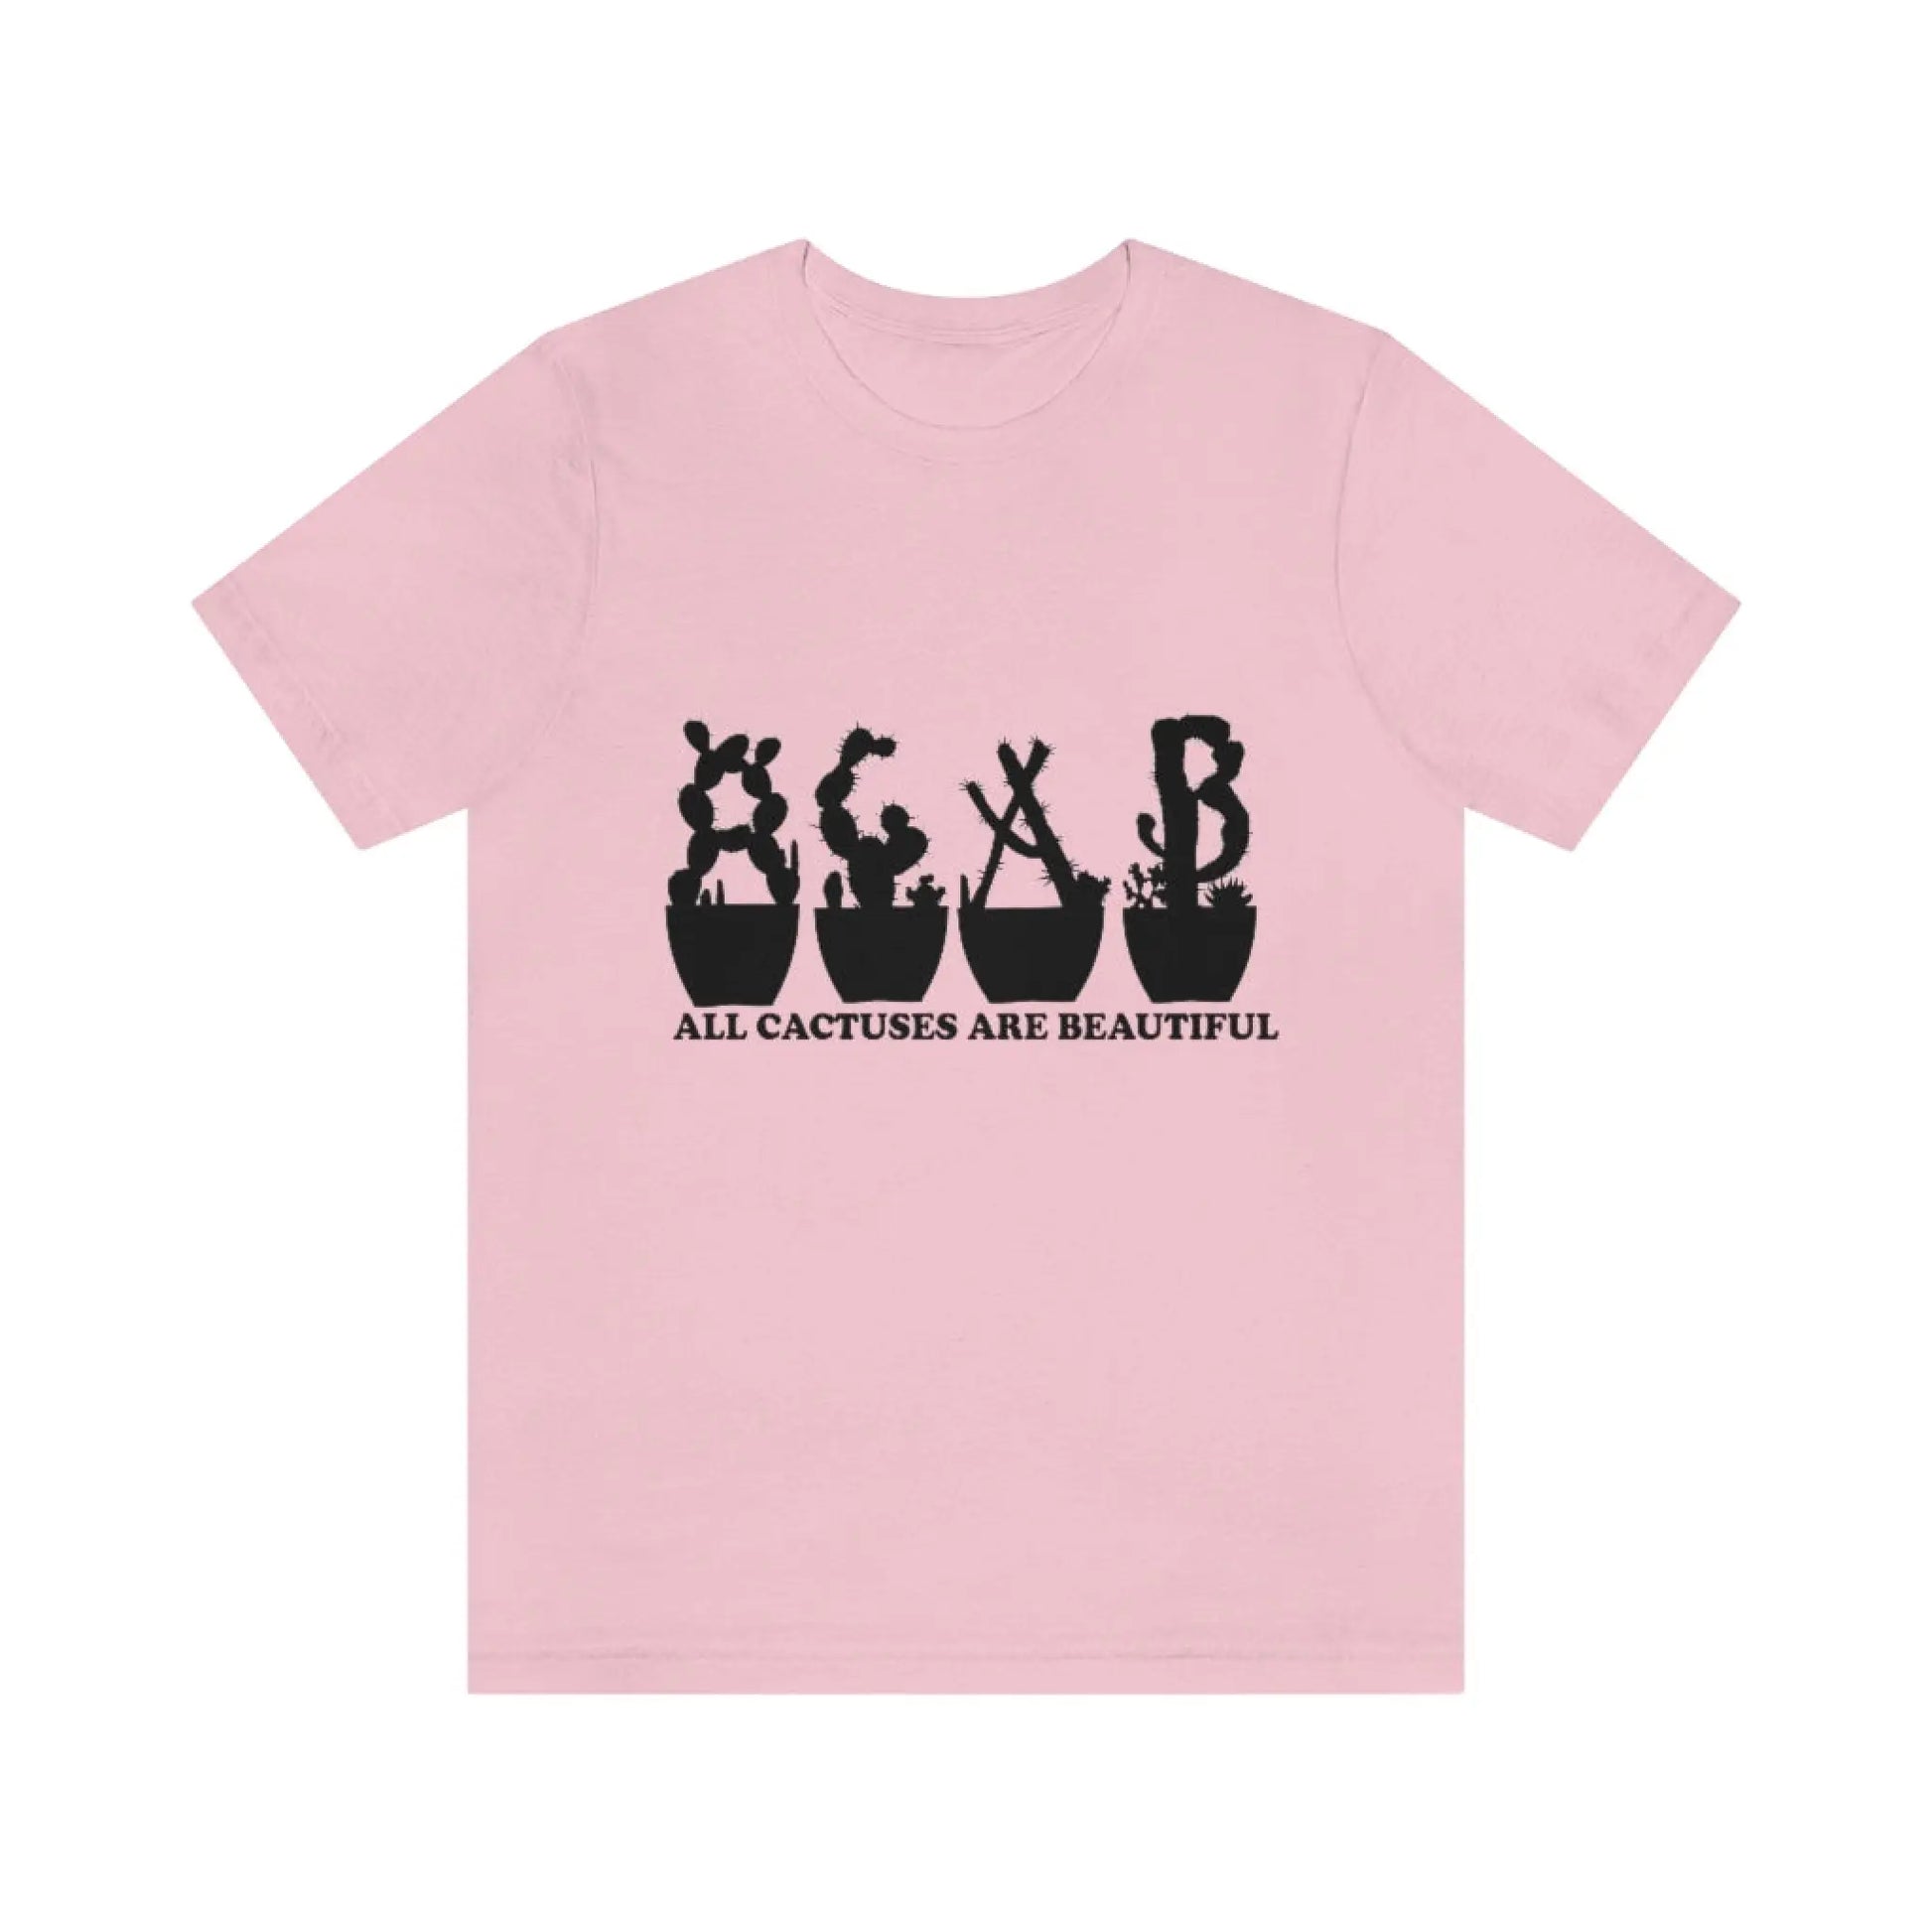 Shirts XL - All Cactuses Are Beautiful - Pink / T-Shirt